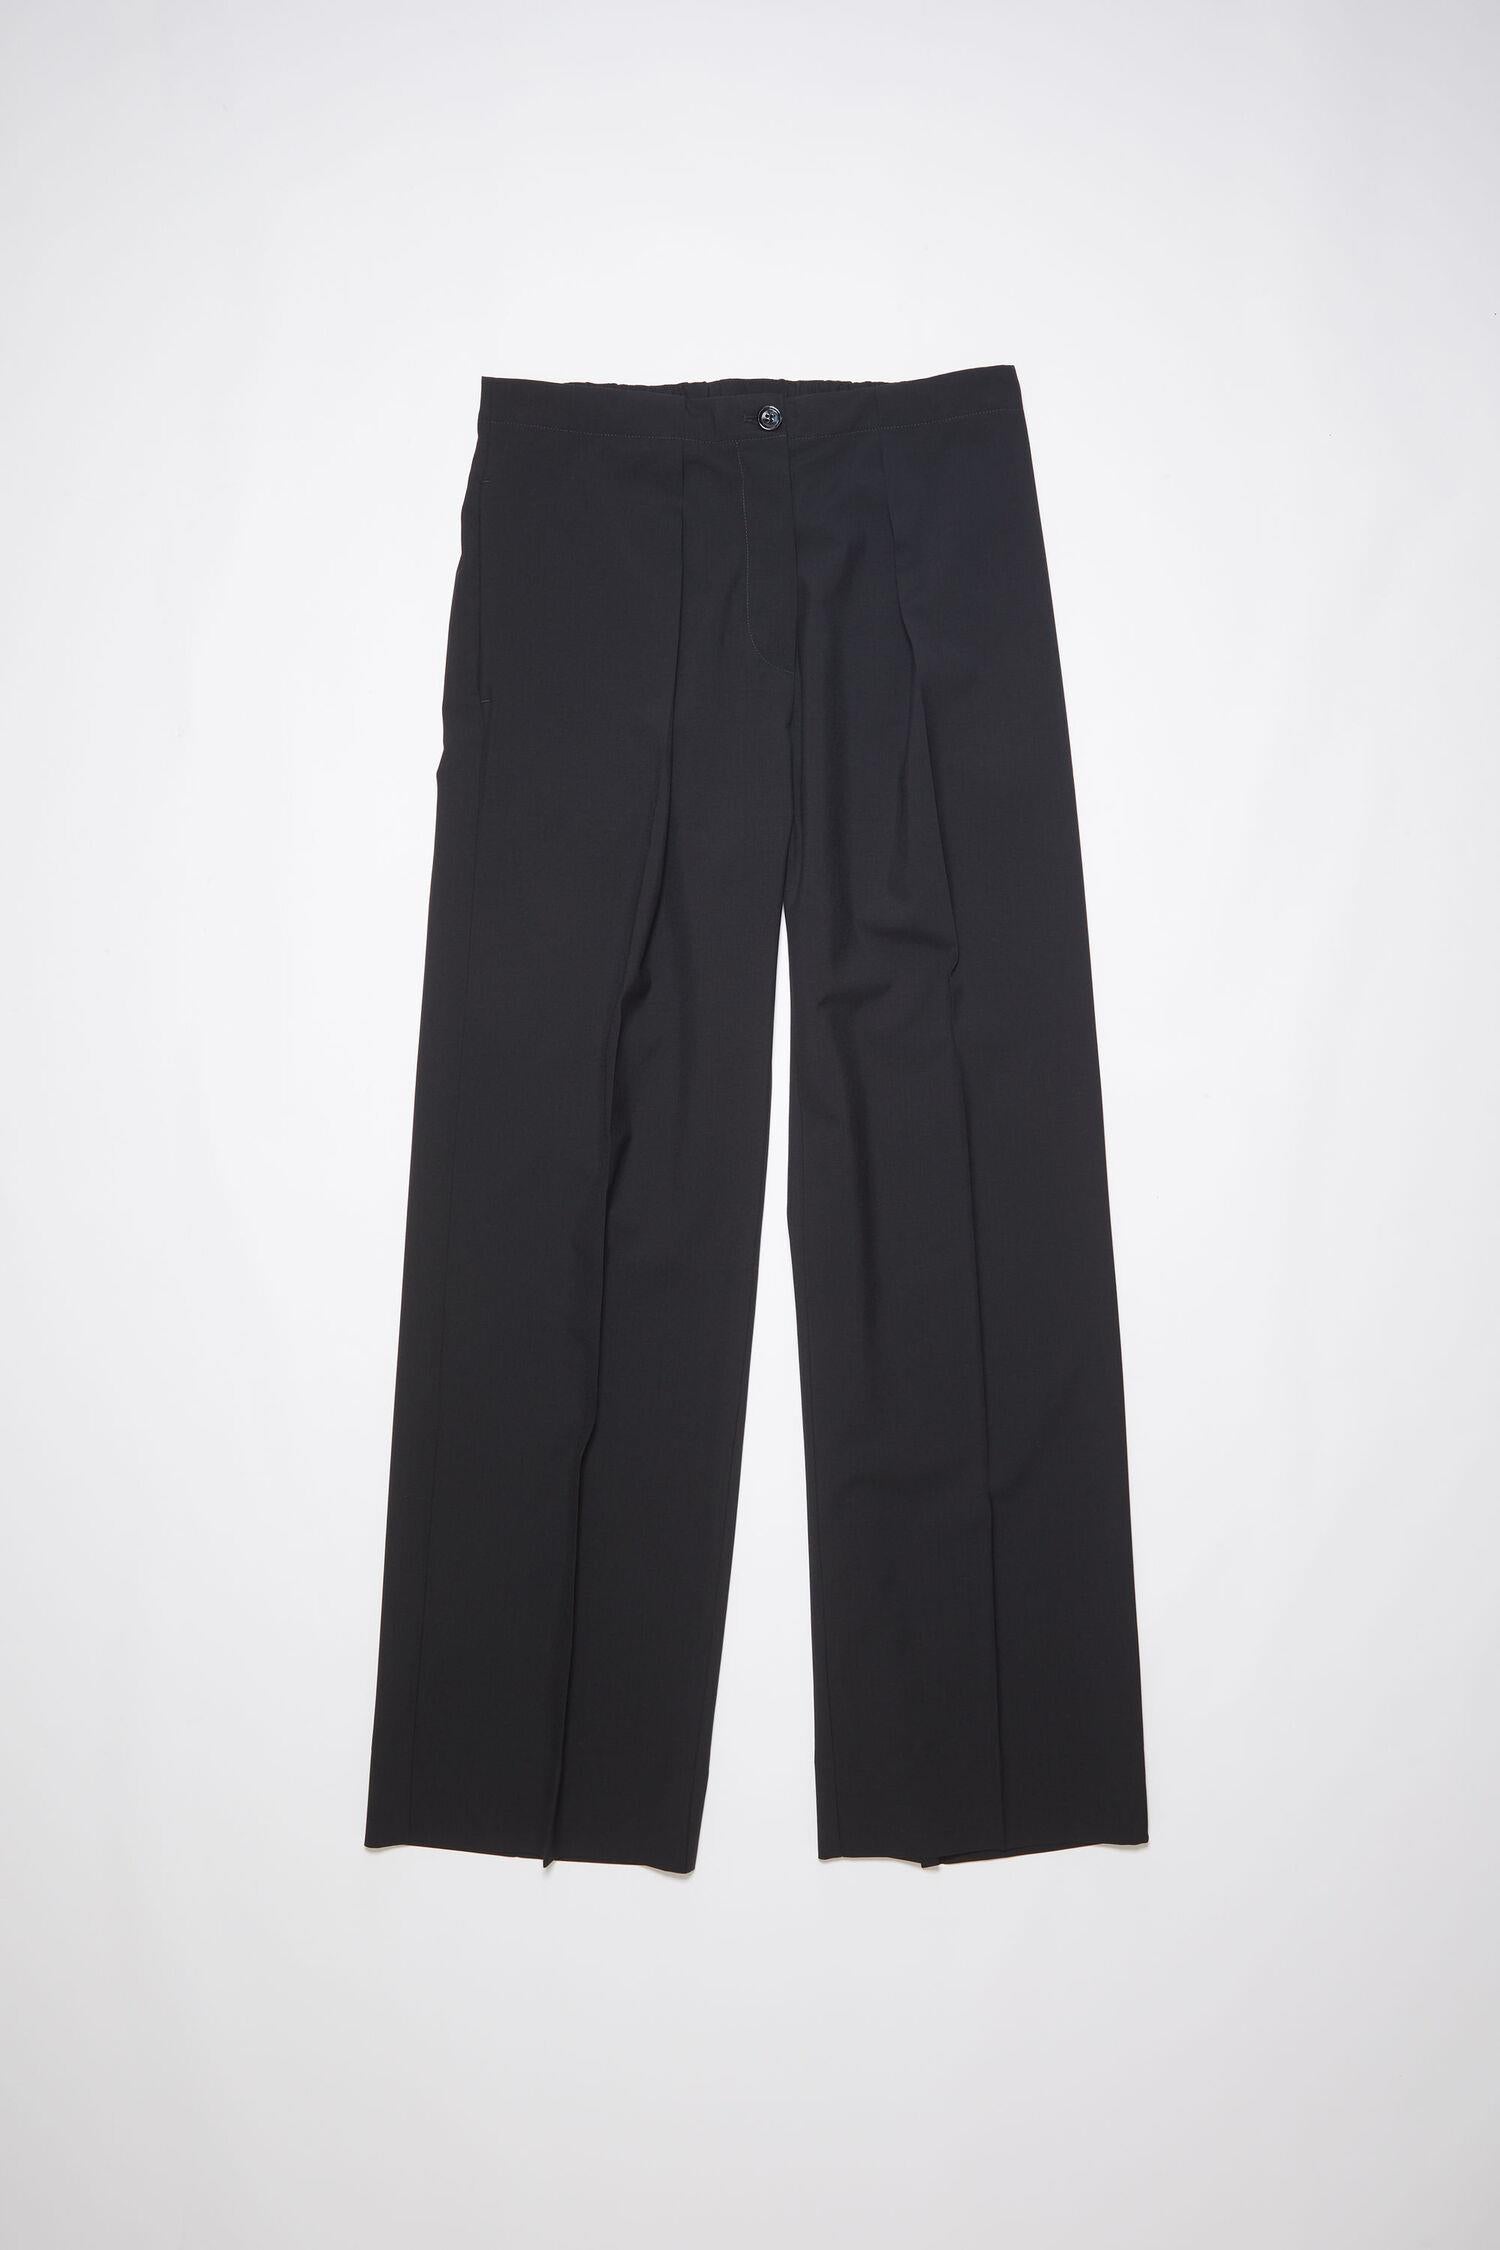 Buy Lipsy Black Tailored Belted Tapered Trousers from Next USA